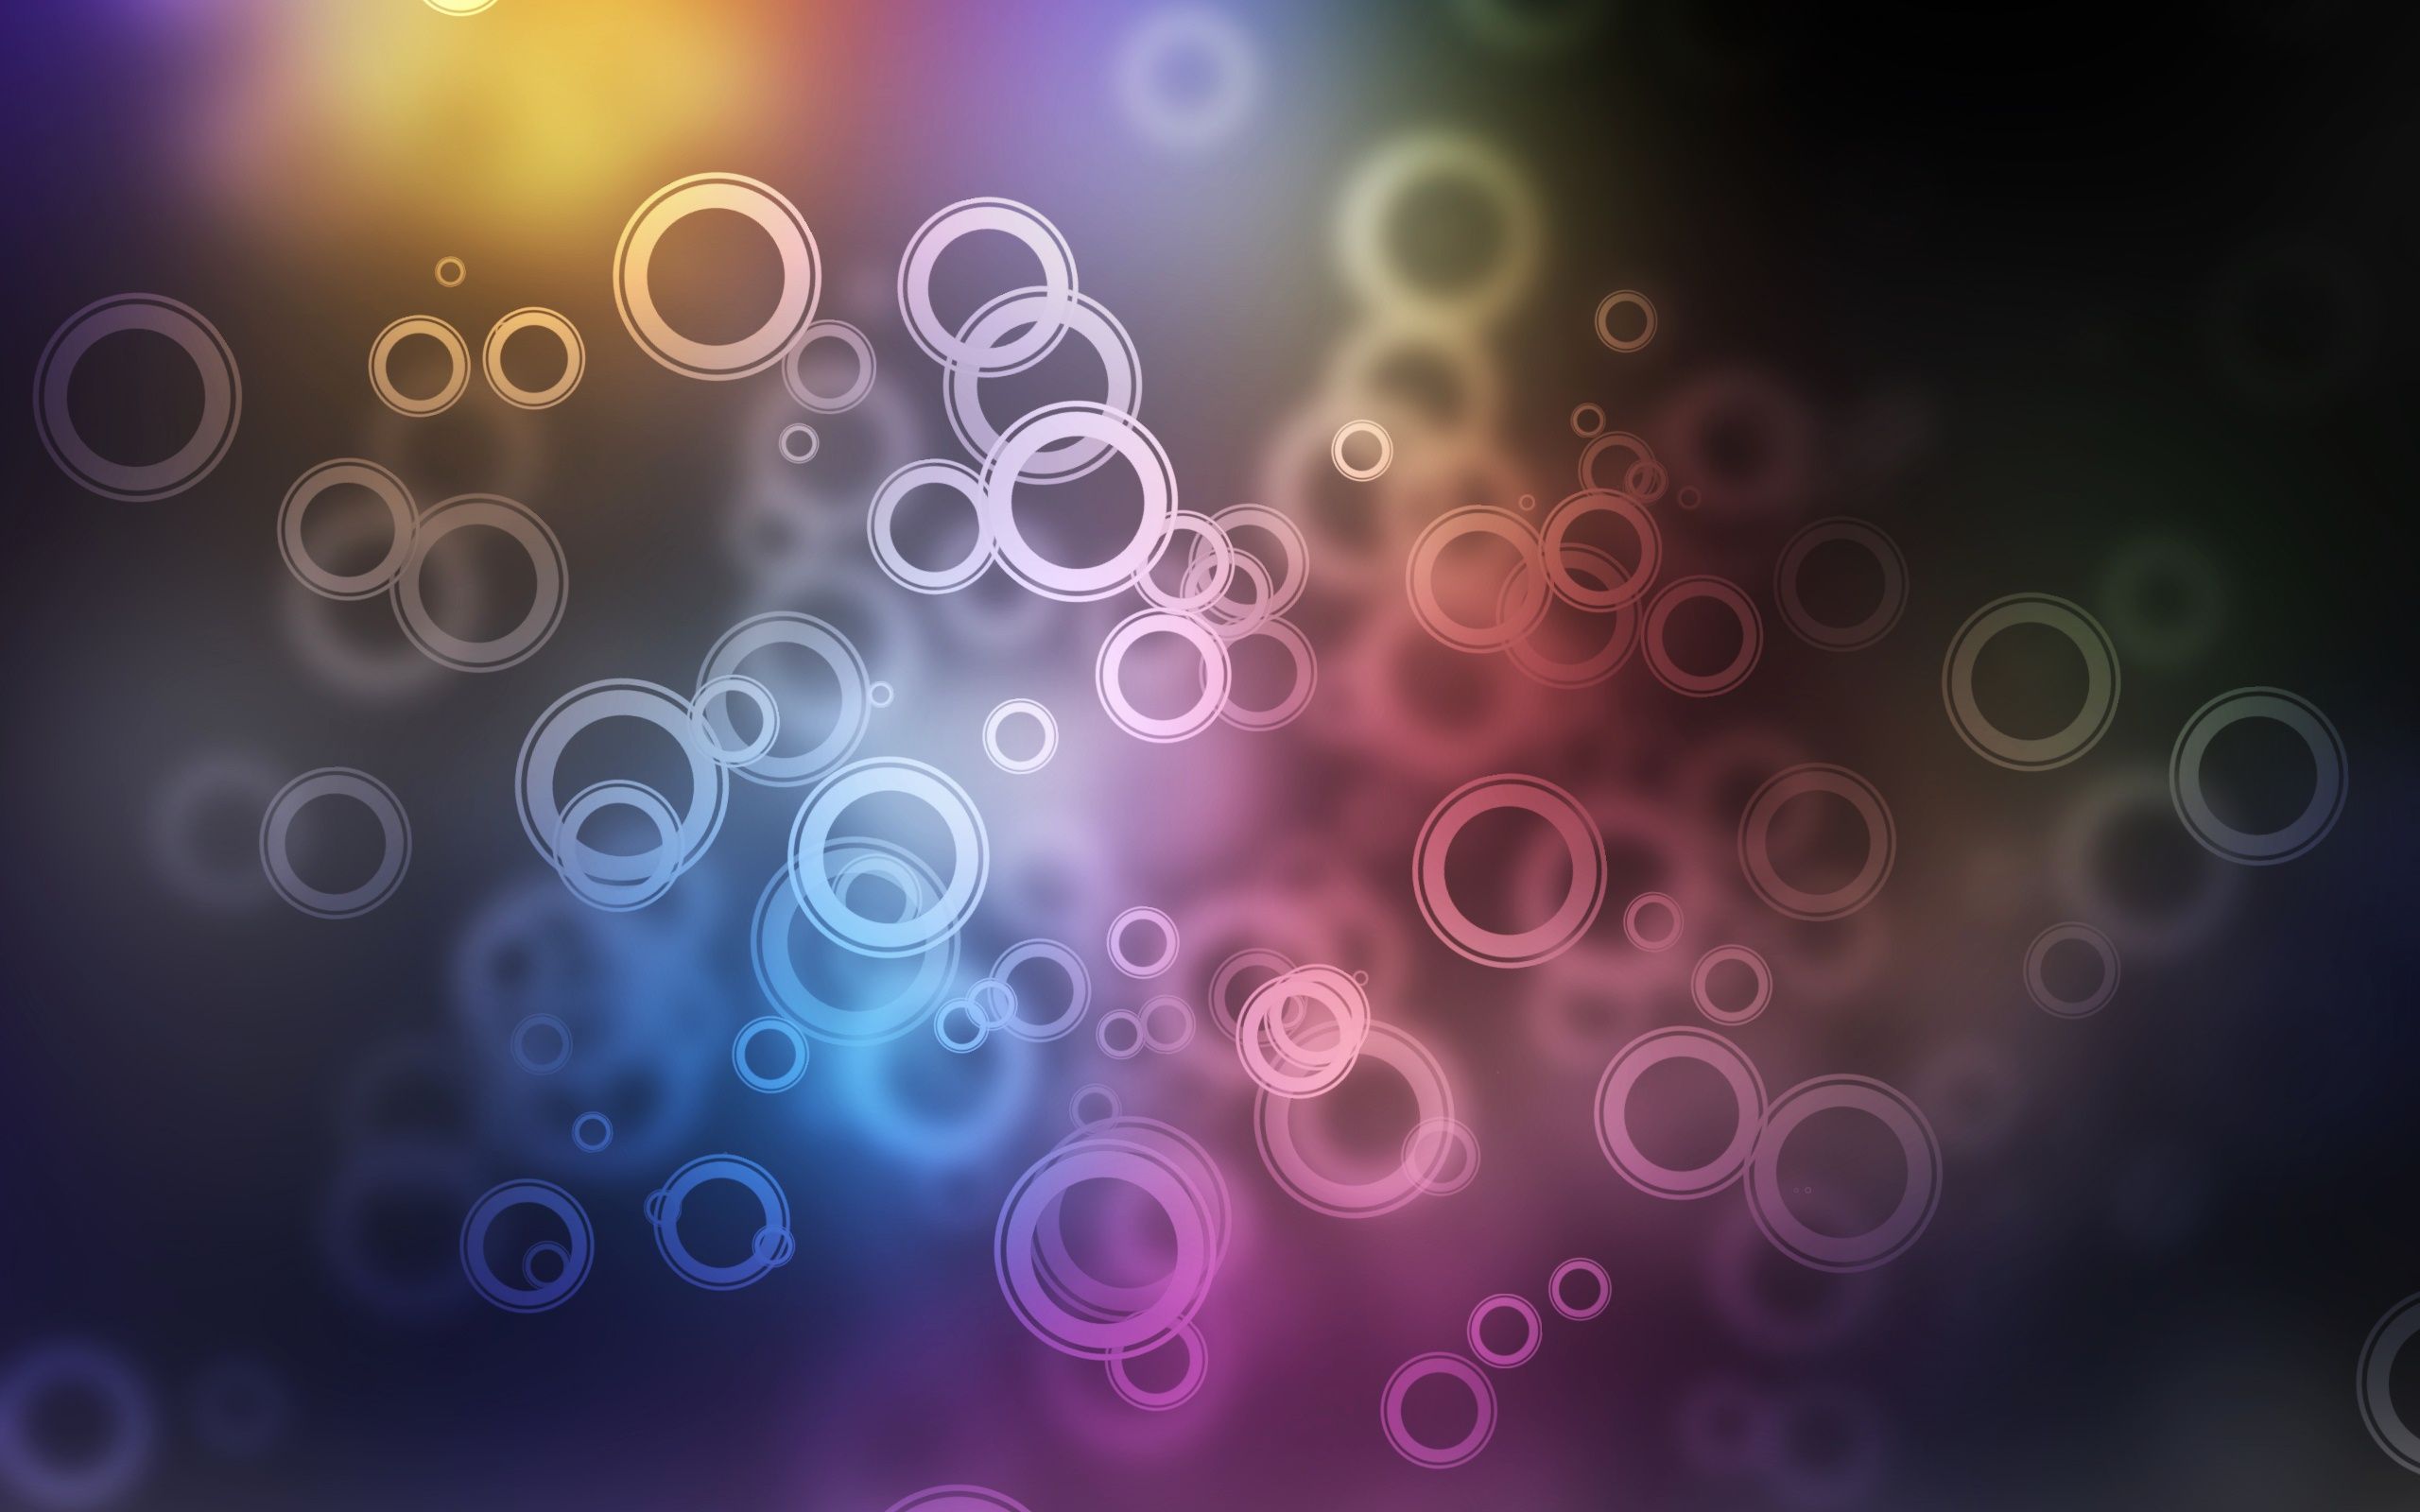 Circles 4K wallpaper for your desktop or mobile screen free and easy to download